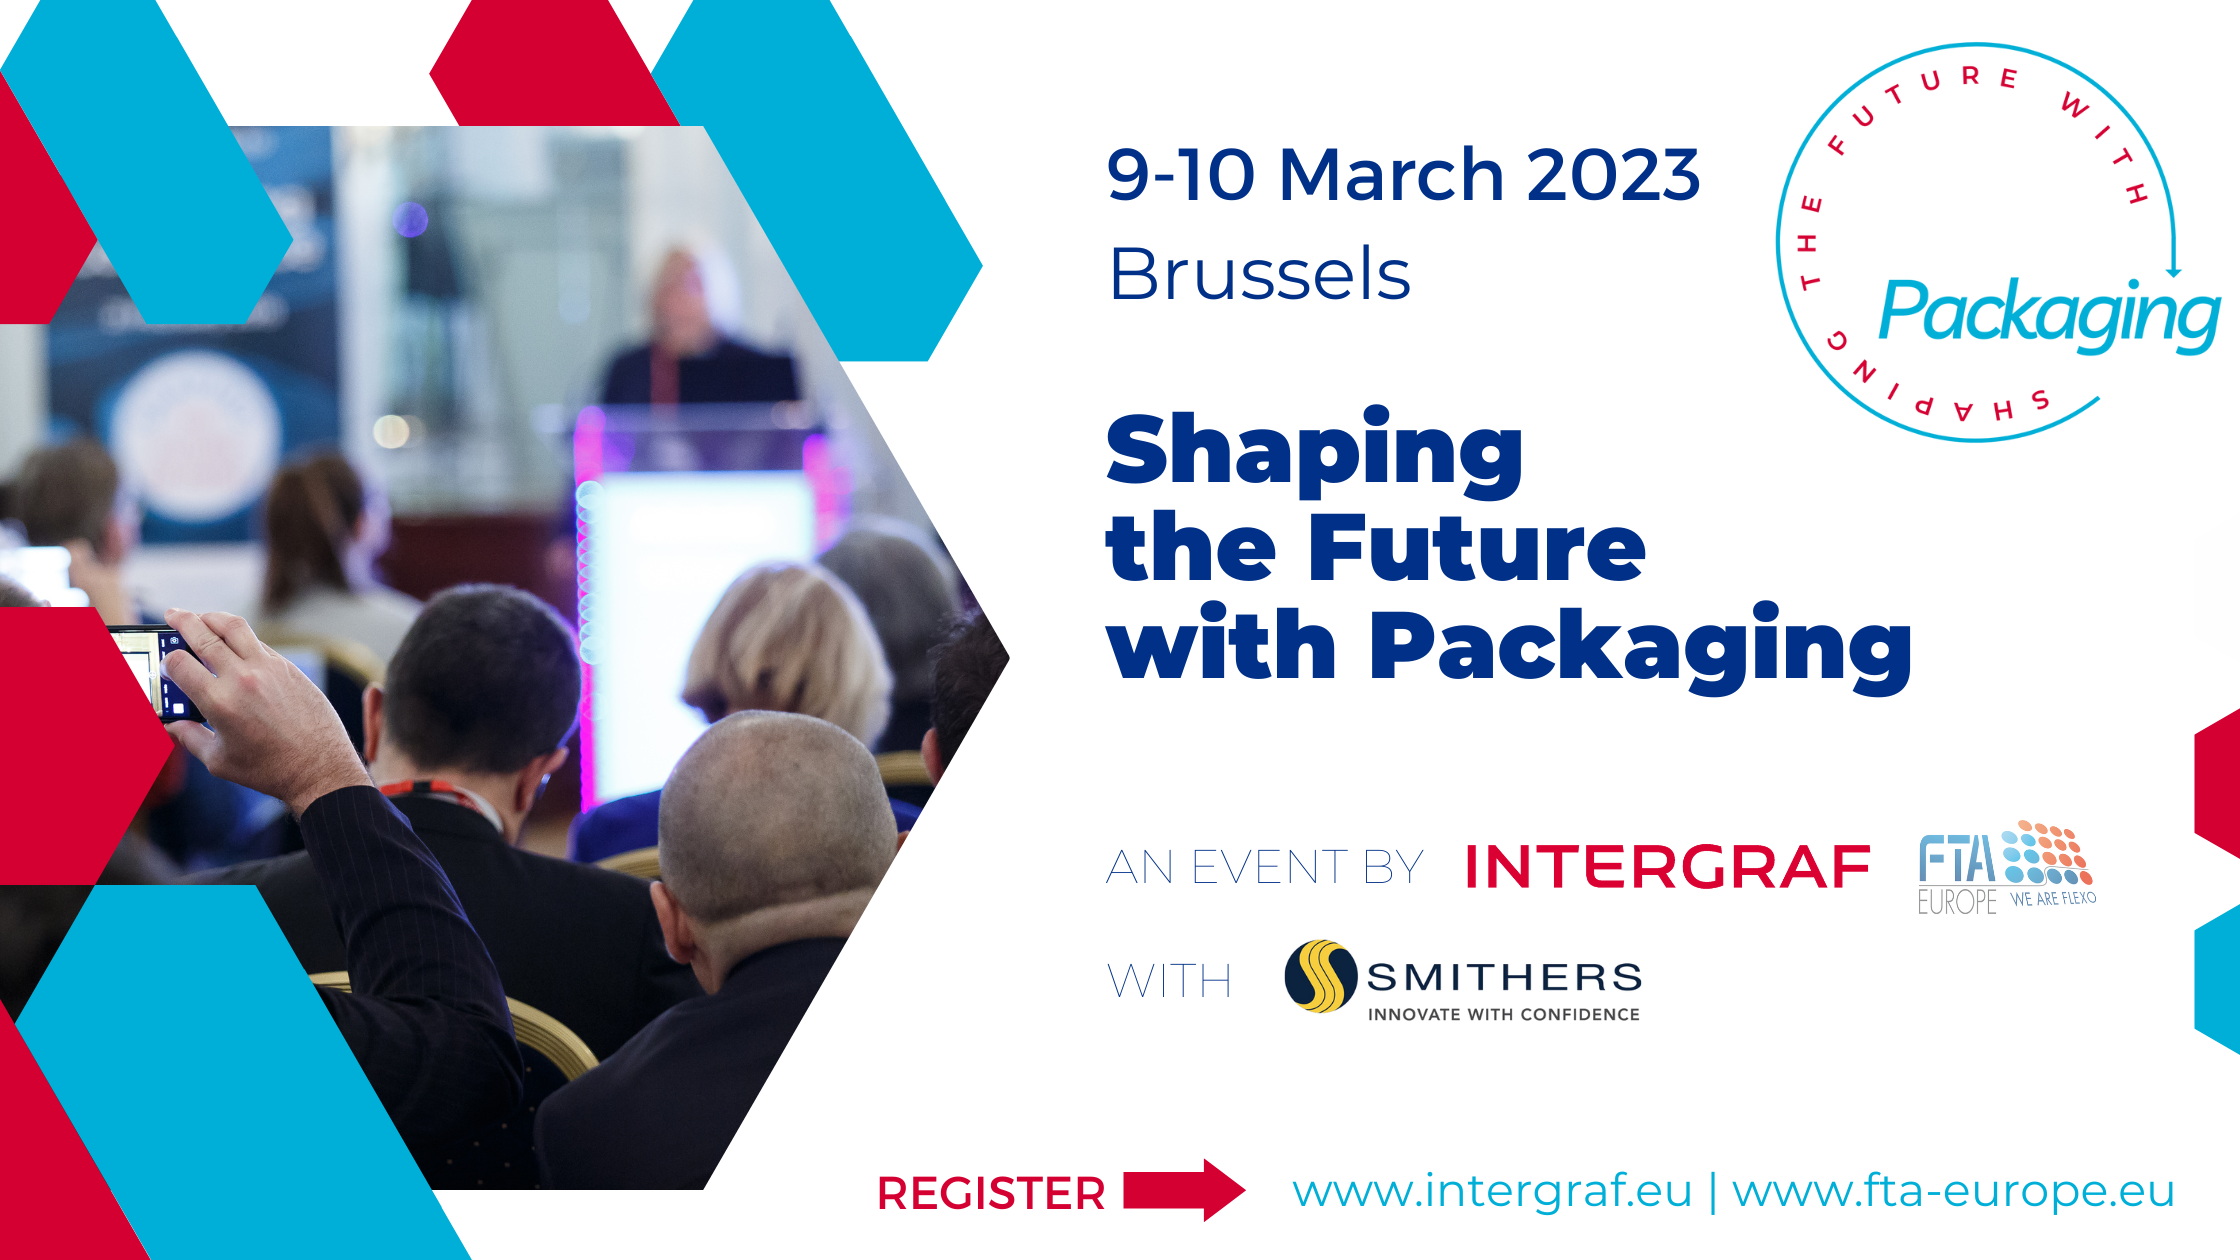 FTA Europe & Intergraf with Smithers – “Shaping the Future with Packaging” Conference